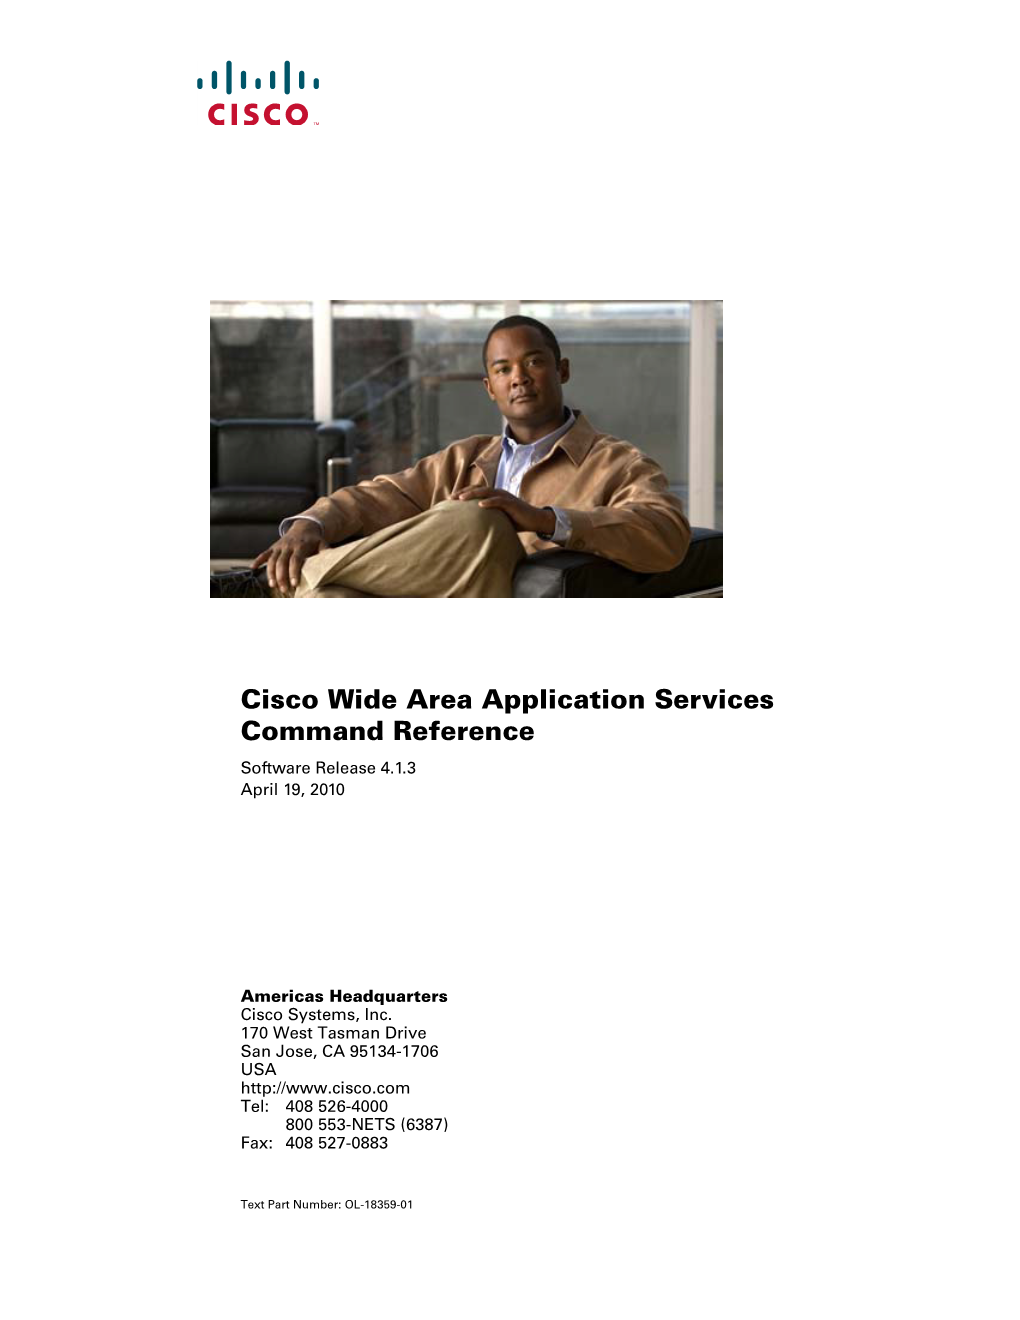 Cisco Wide Area Application Services Command Reference (Software